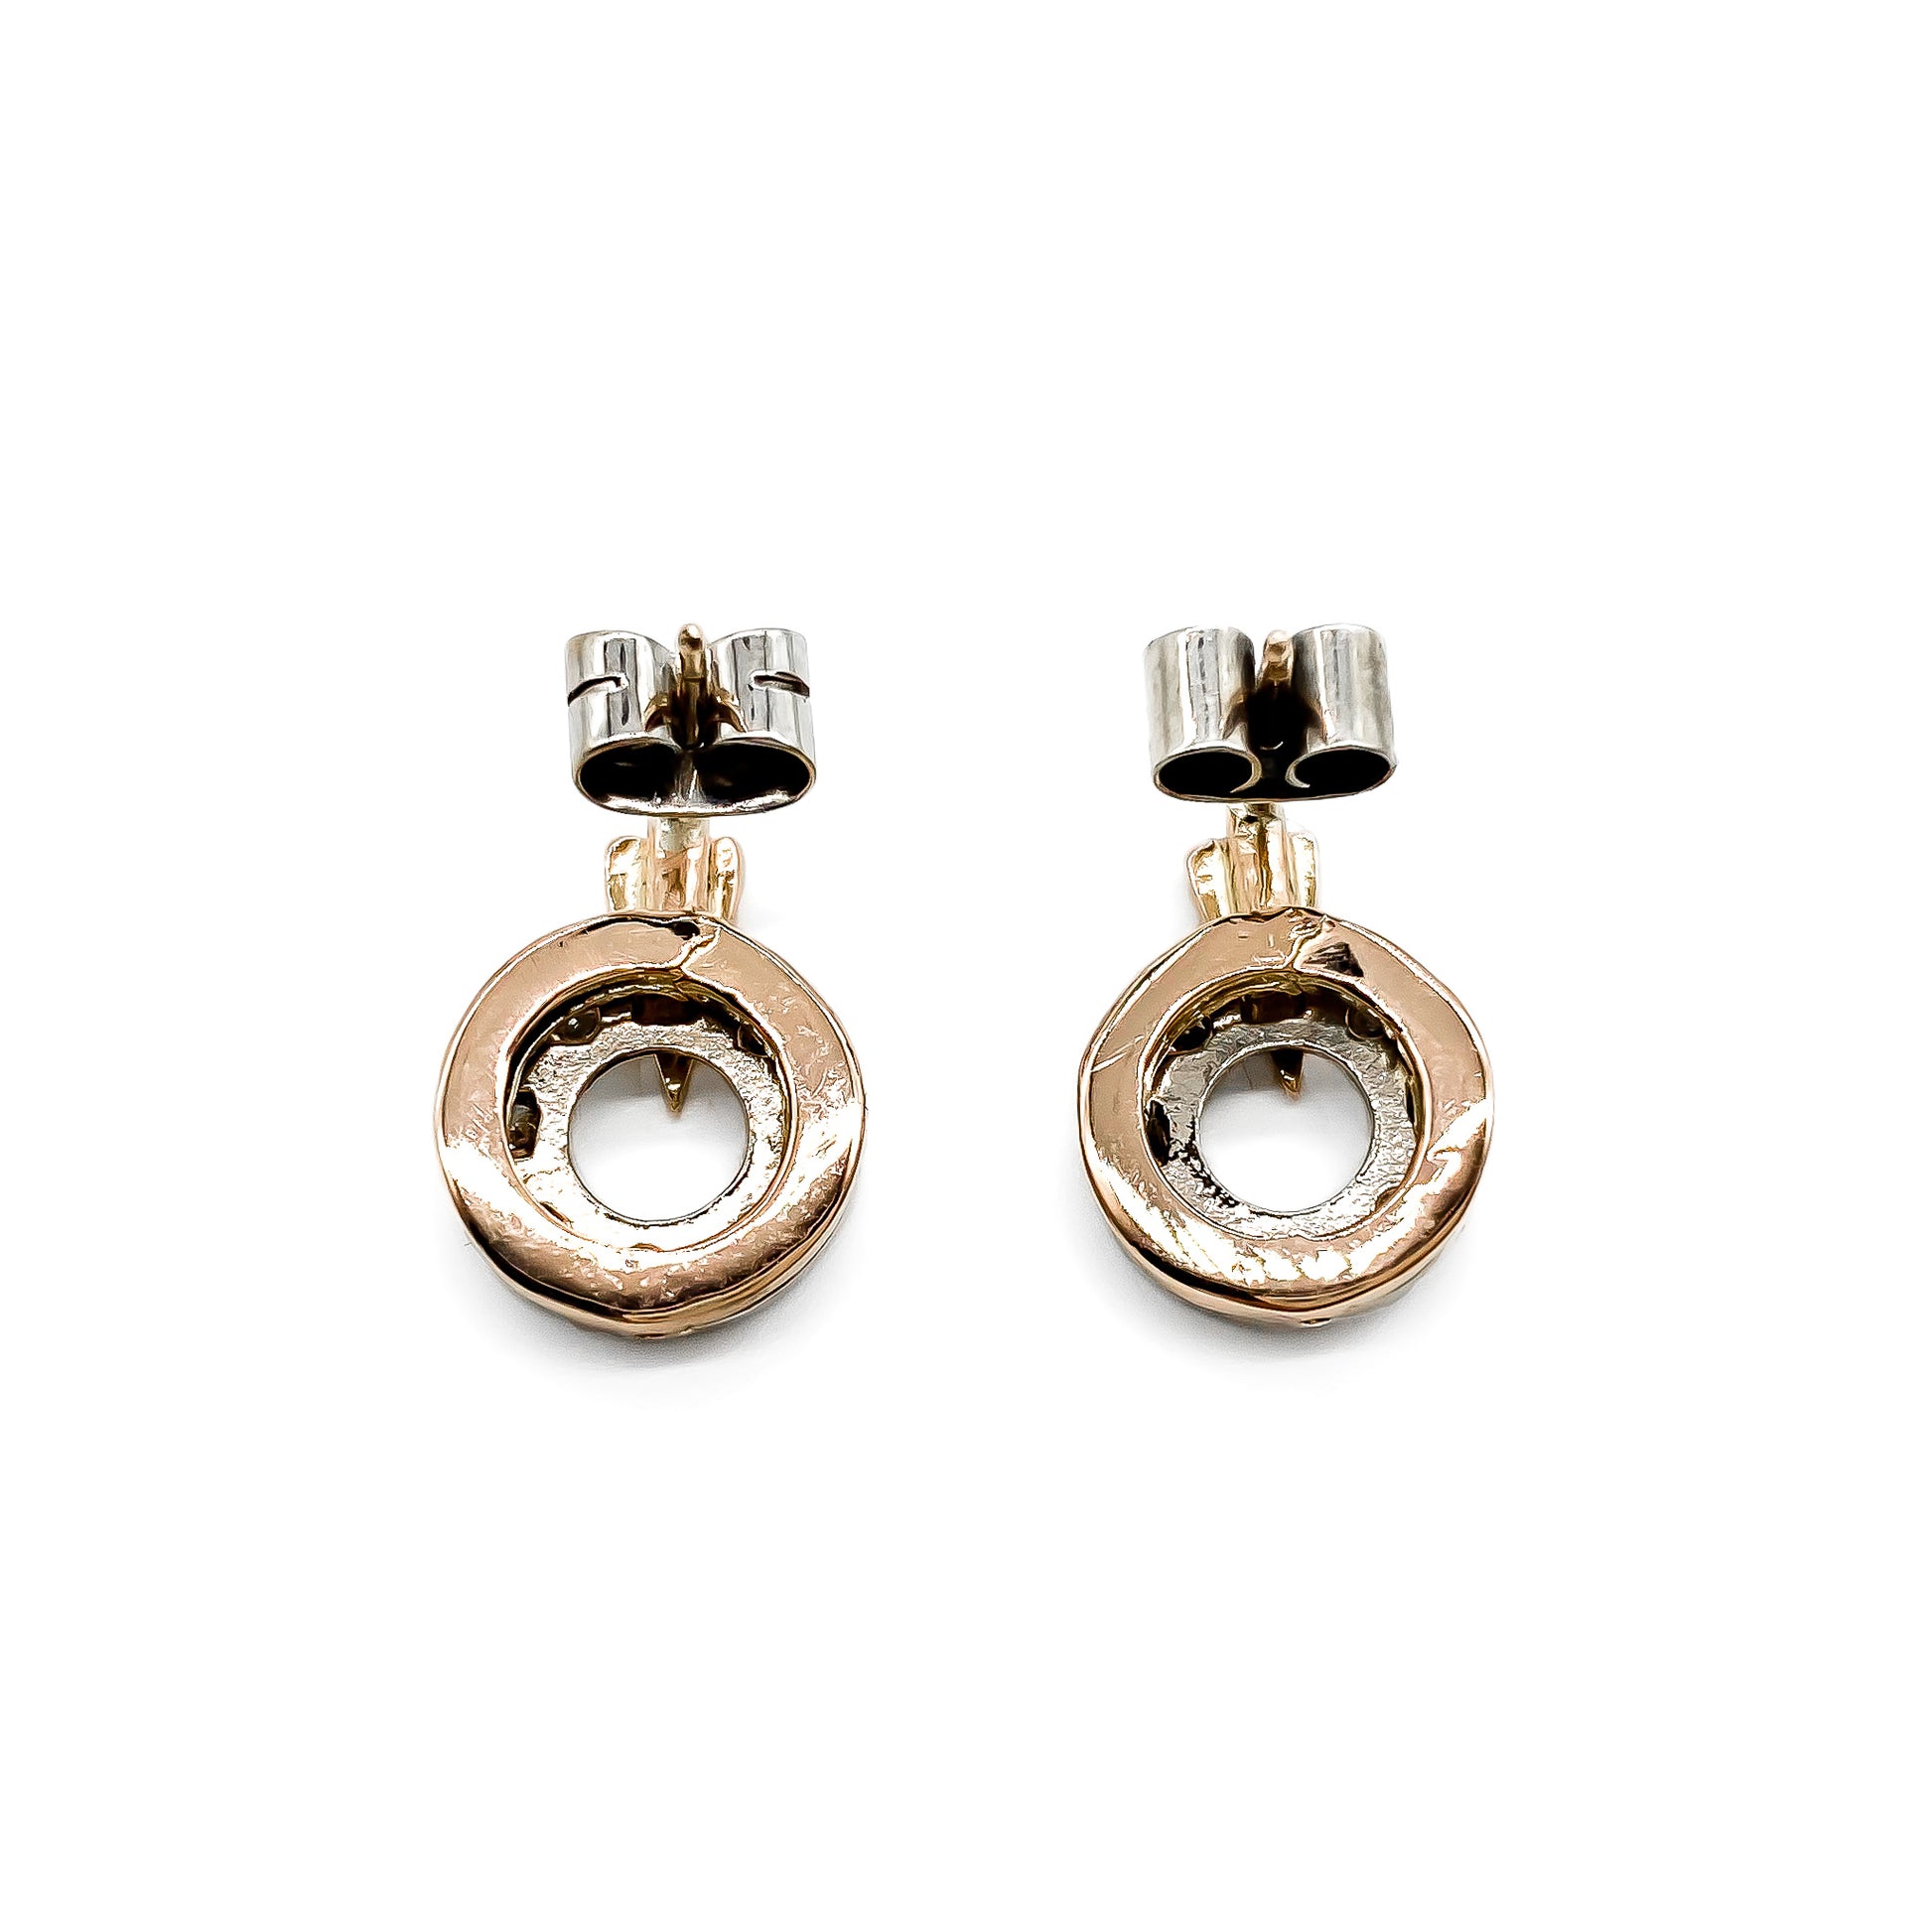 Stylish Art Deco 15ct rose and white gold drop earrings with sparkling pavé set diamonds. 